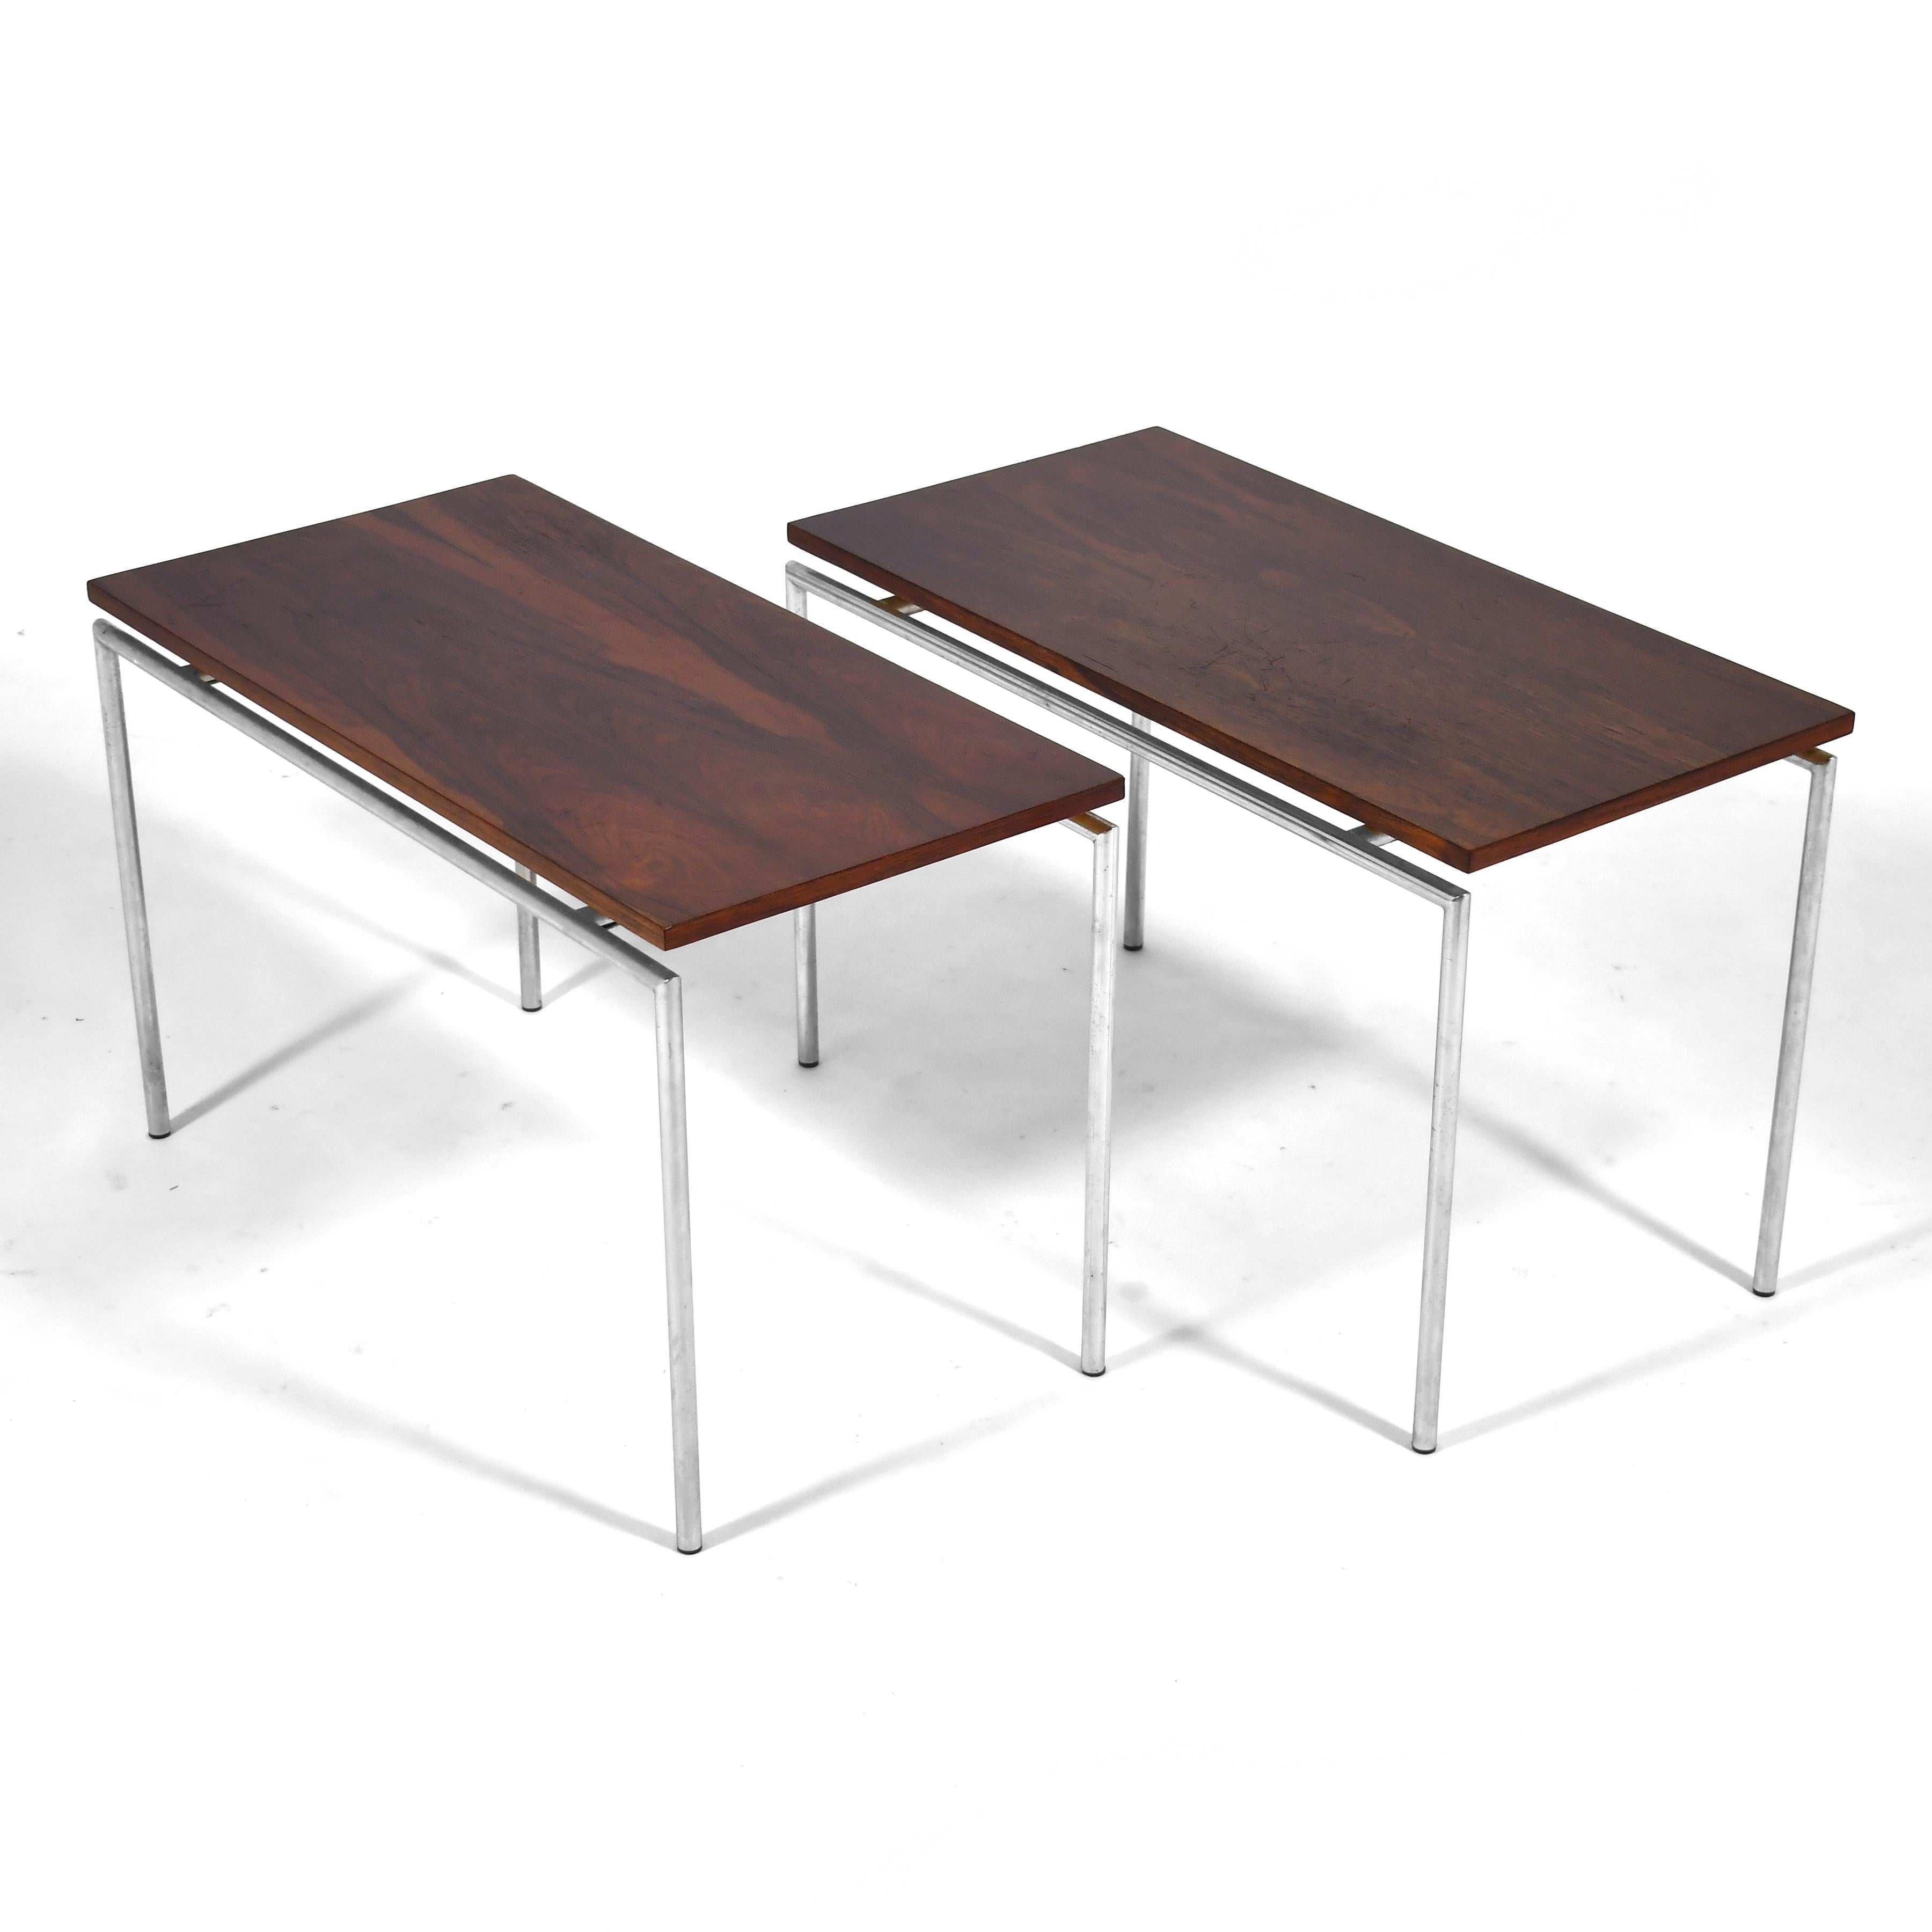 This understated and sleek pair of side tables by Knud Joos for Jason Mobler subscribe to the minimalist strain of Danish modern as practiced by Poul Kjaerholm. The slim tops of rich rosewood appear to float over their lean chrome bases.

17.5